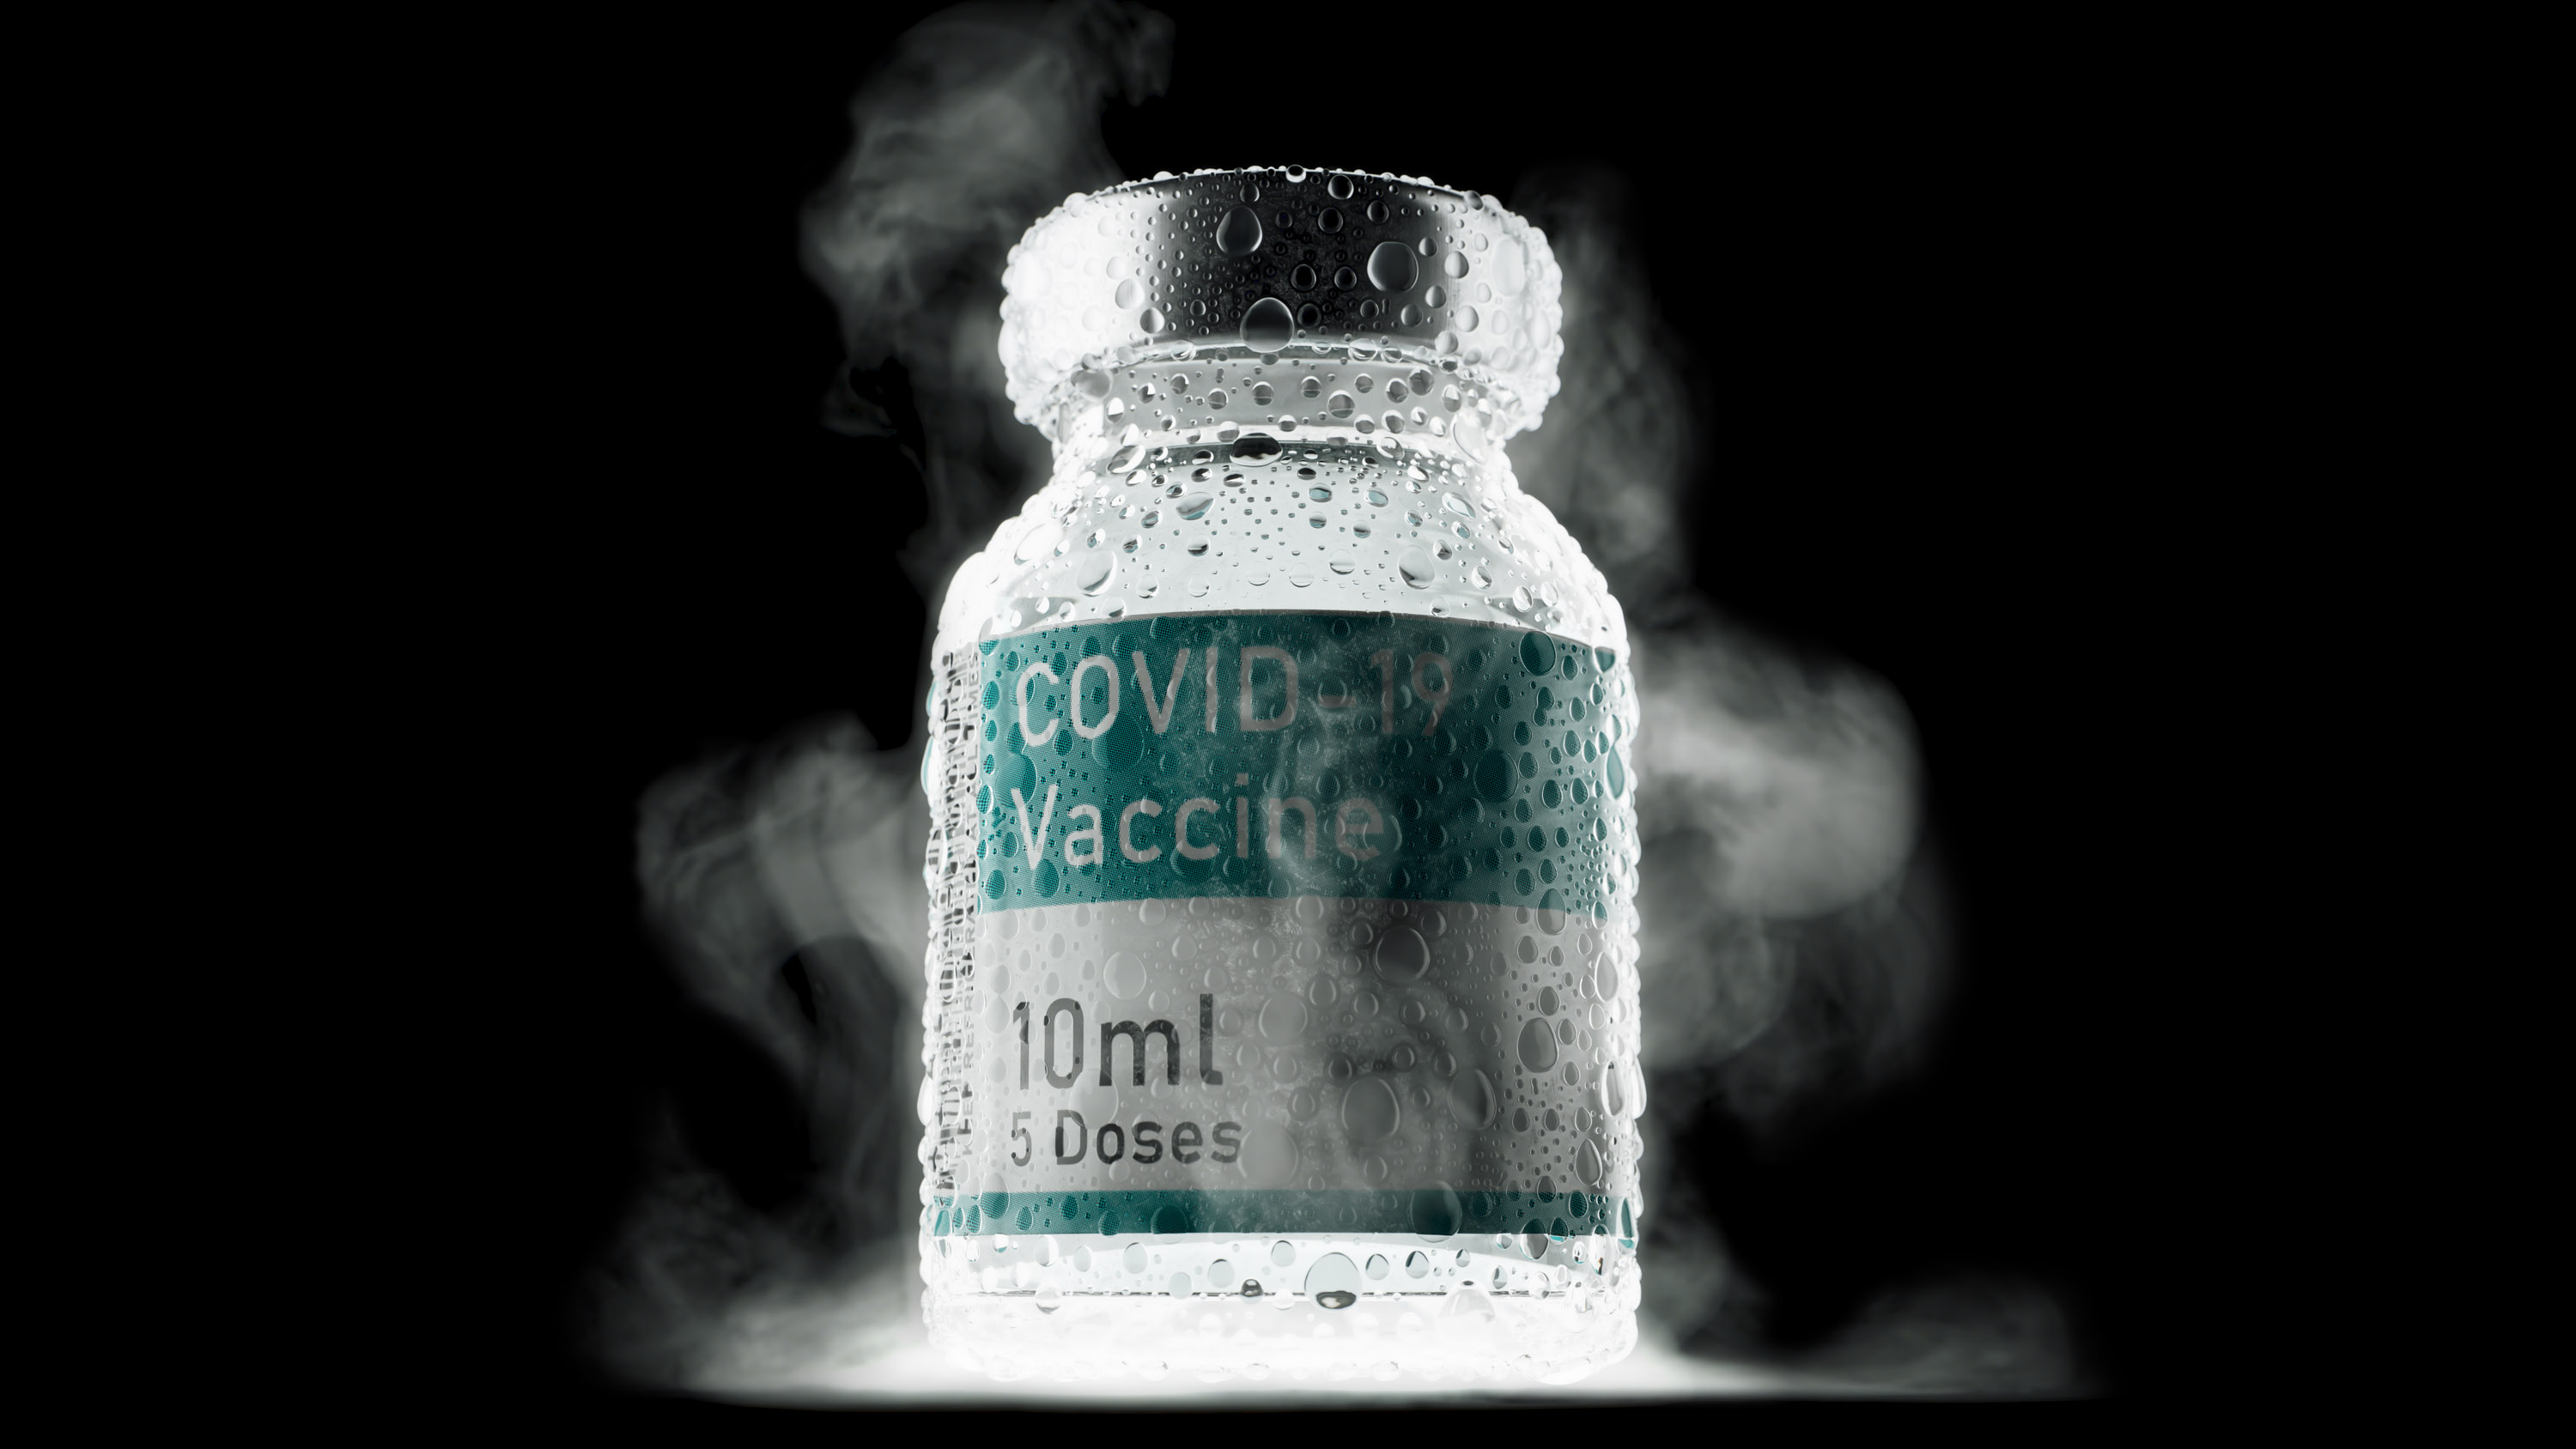 Covid vaccine vial dry ice cold